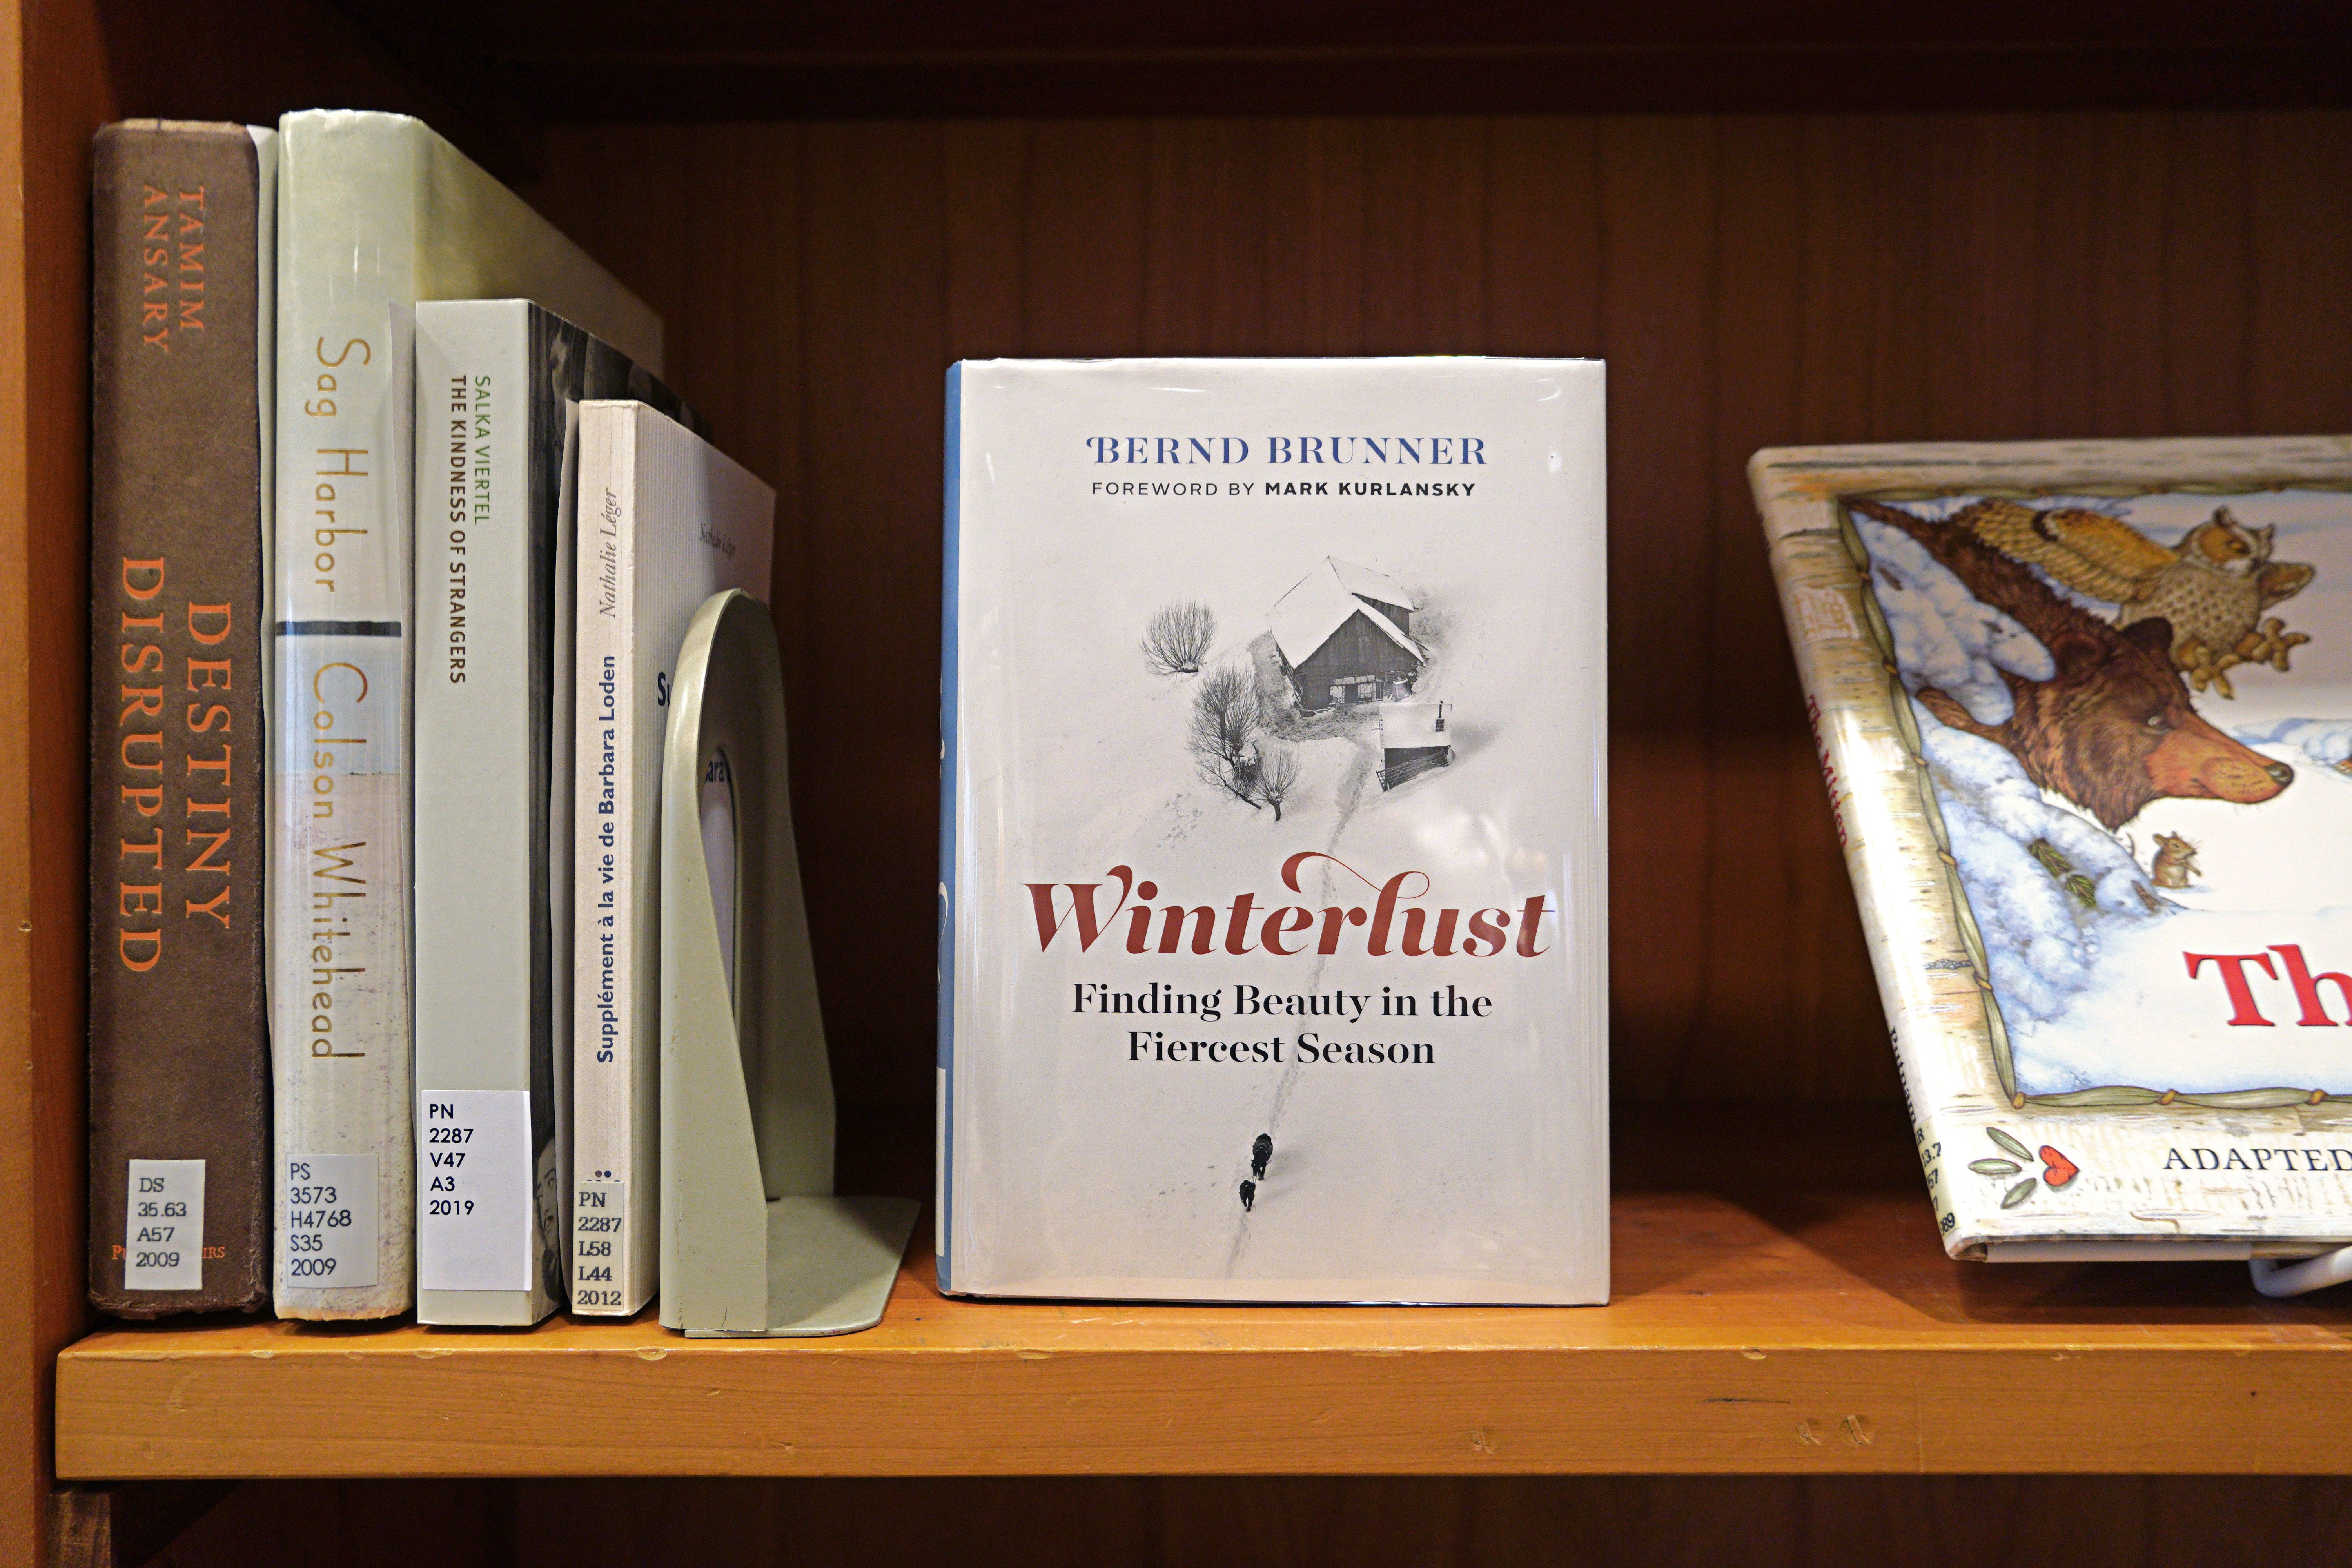 The book Winterlust is displayed on a shelf next to other titles.